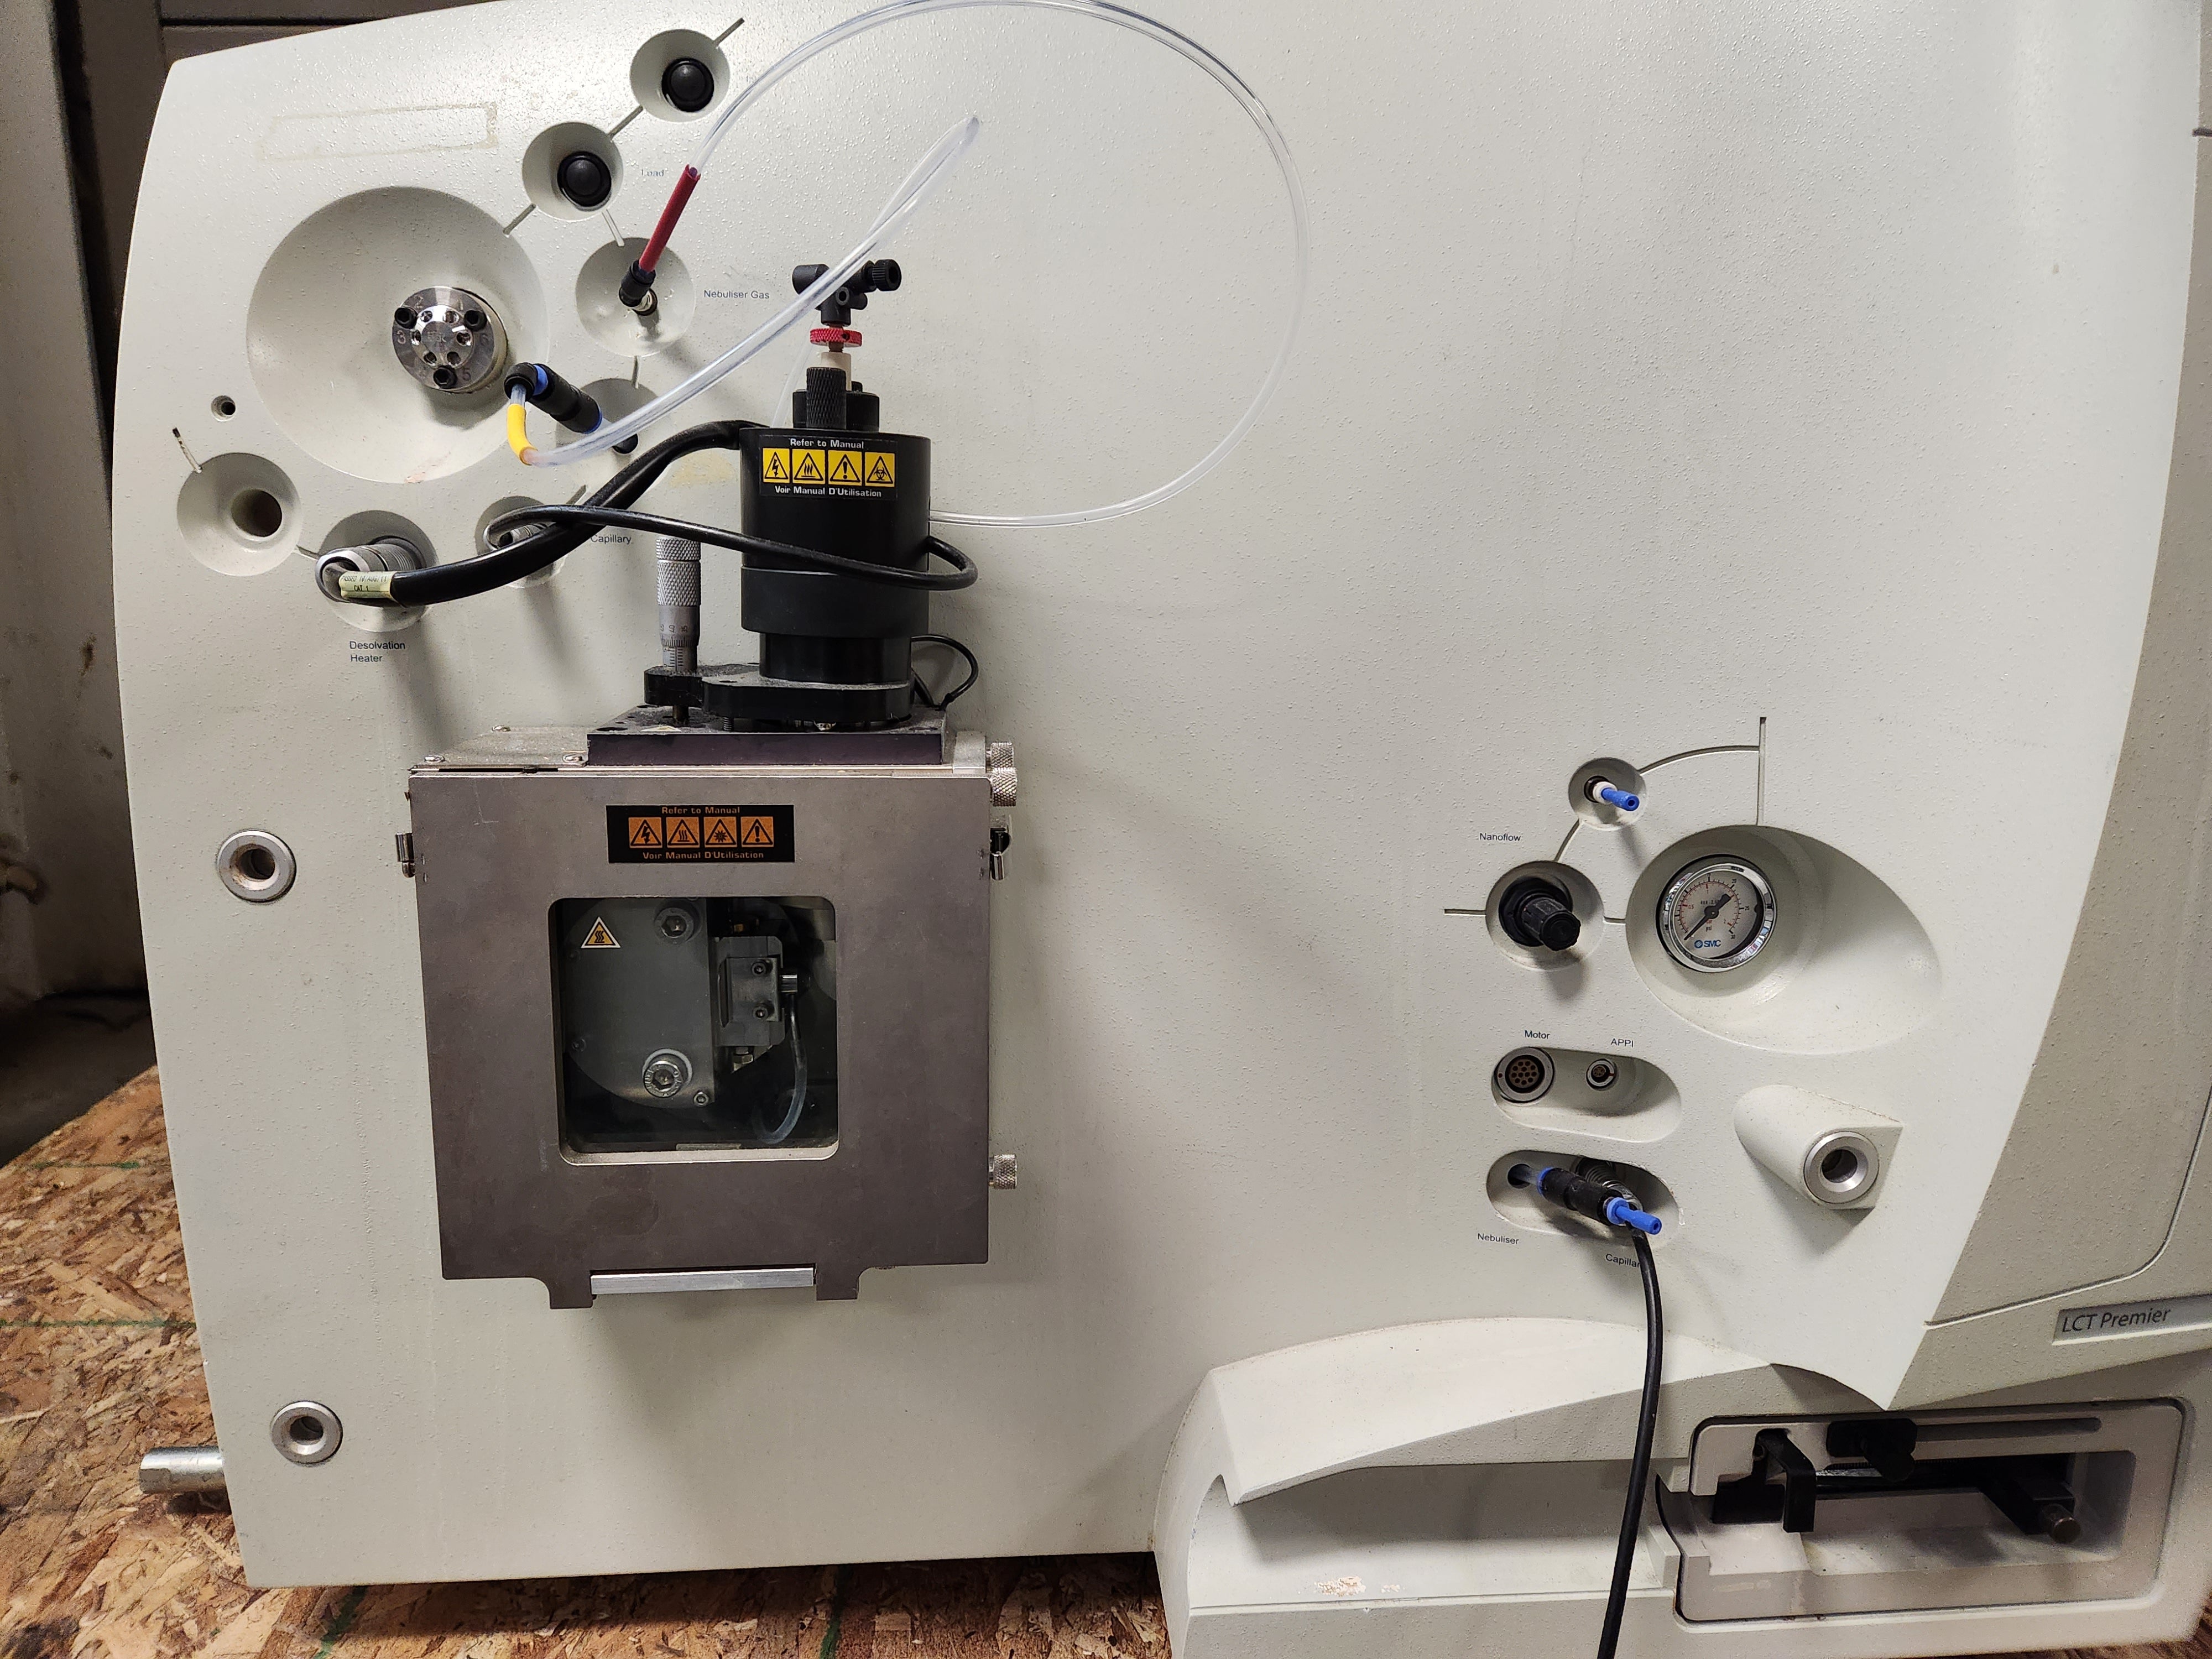 Waters LCT Premier Micromass Mass Spectrometer